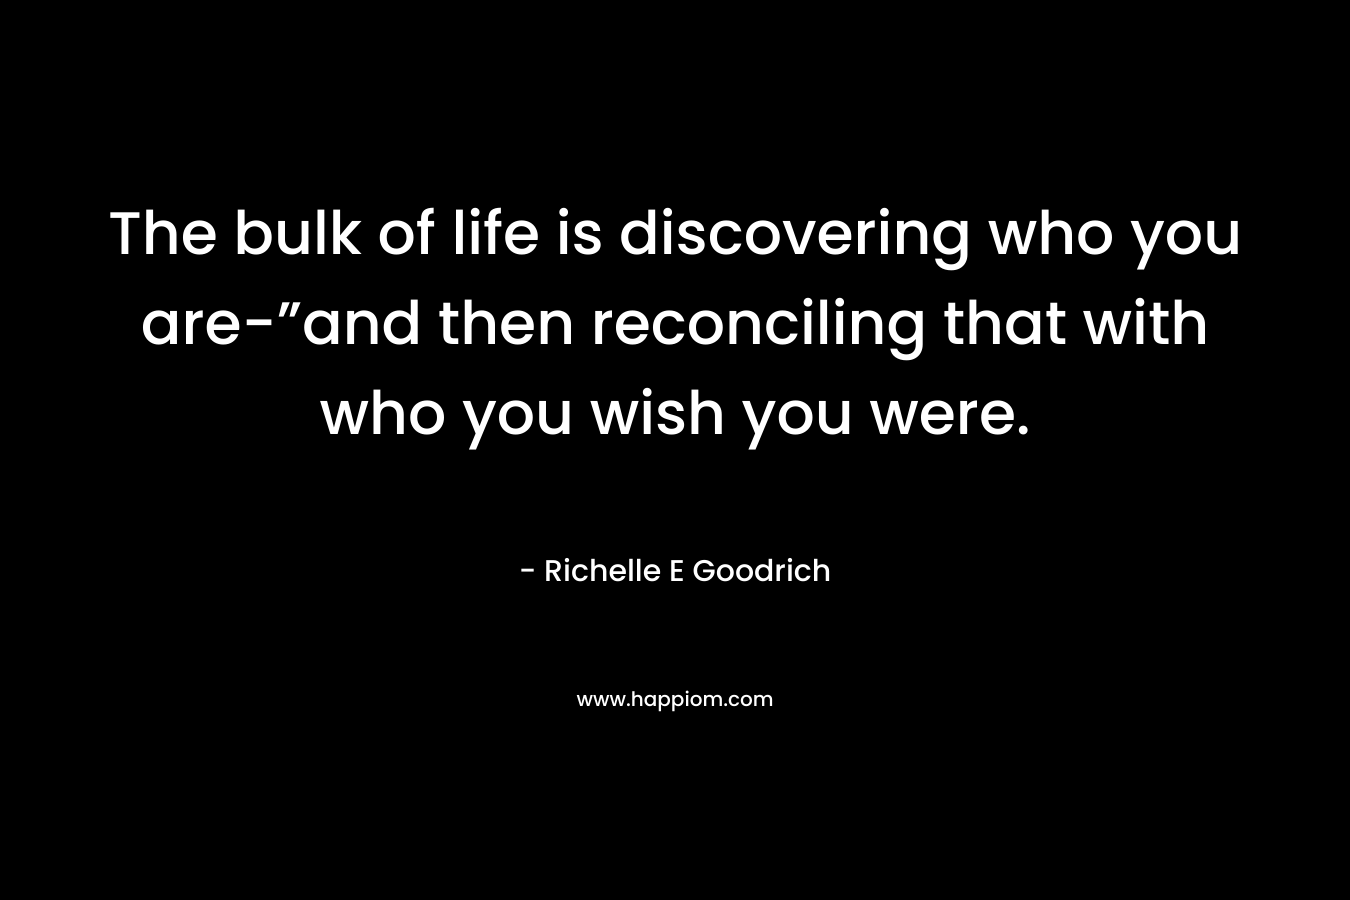 The bulk of life is discovering who you are-”and then reconciling that with who you wish you were. – Richelle E Goodrich